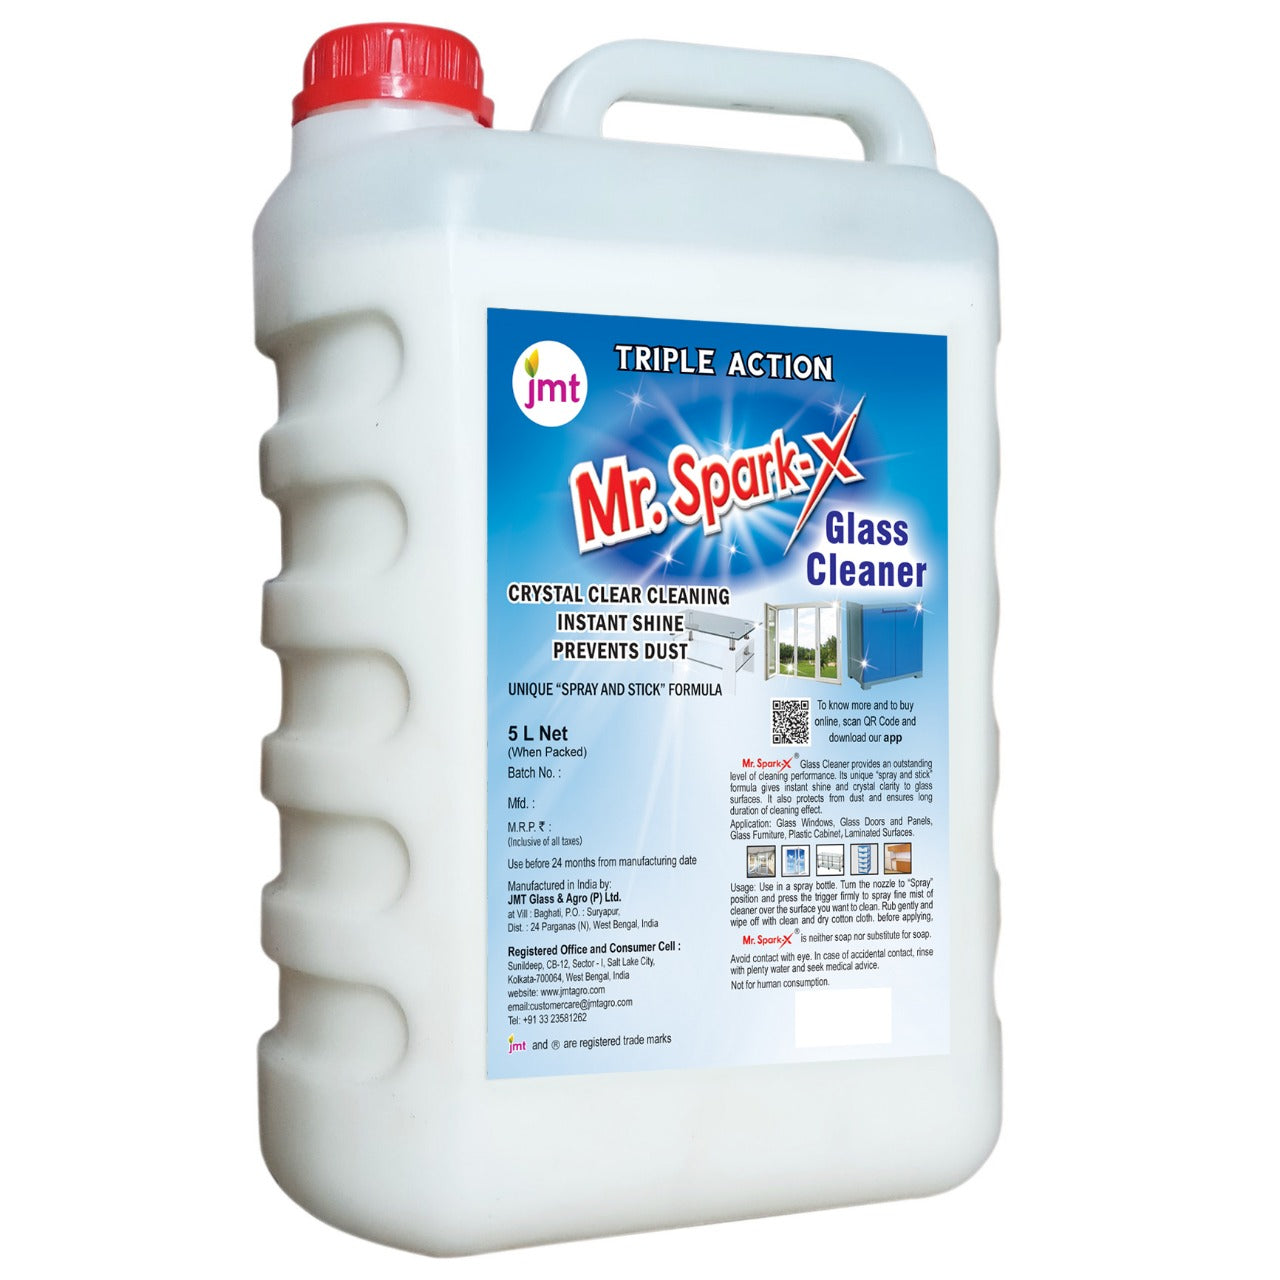 5L Mr Spark-X Triple Action Glass Cleaner for Crystal Clear Cleaning and Instant Shine with Dust Protection